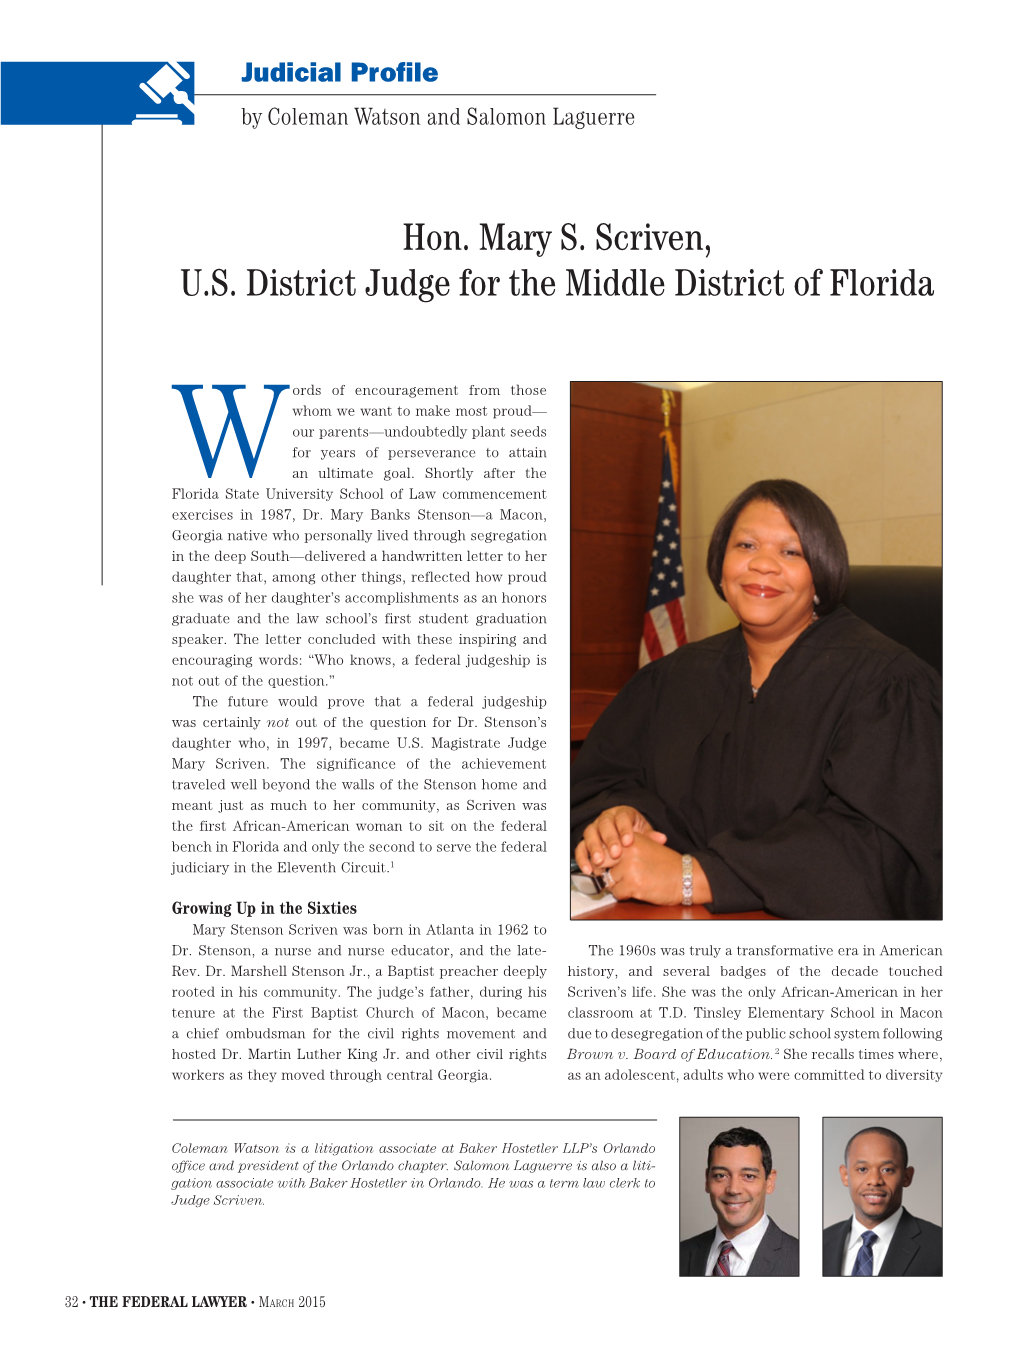 Hon. Mary S. Scriven, U.S. District Judge for the Middle District of Florida